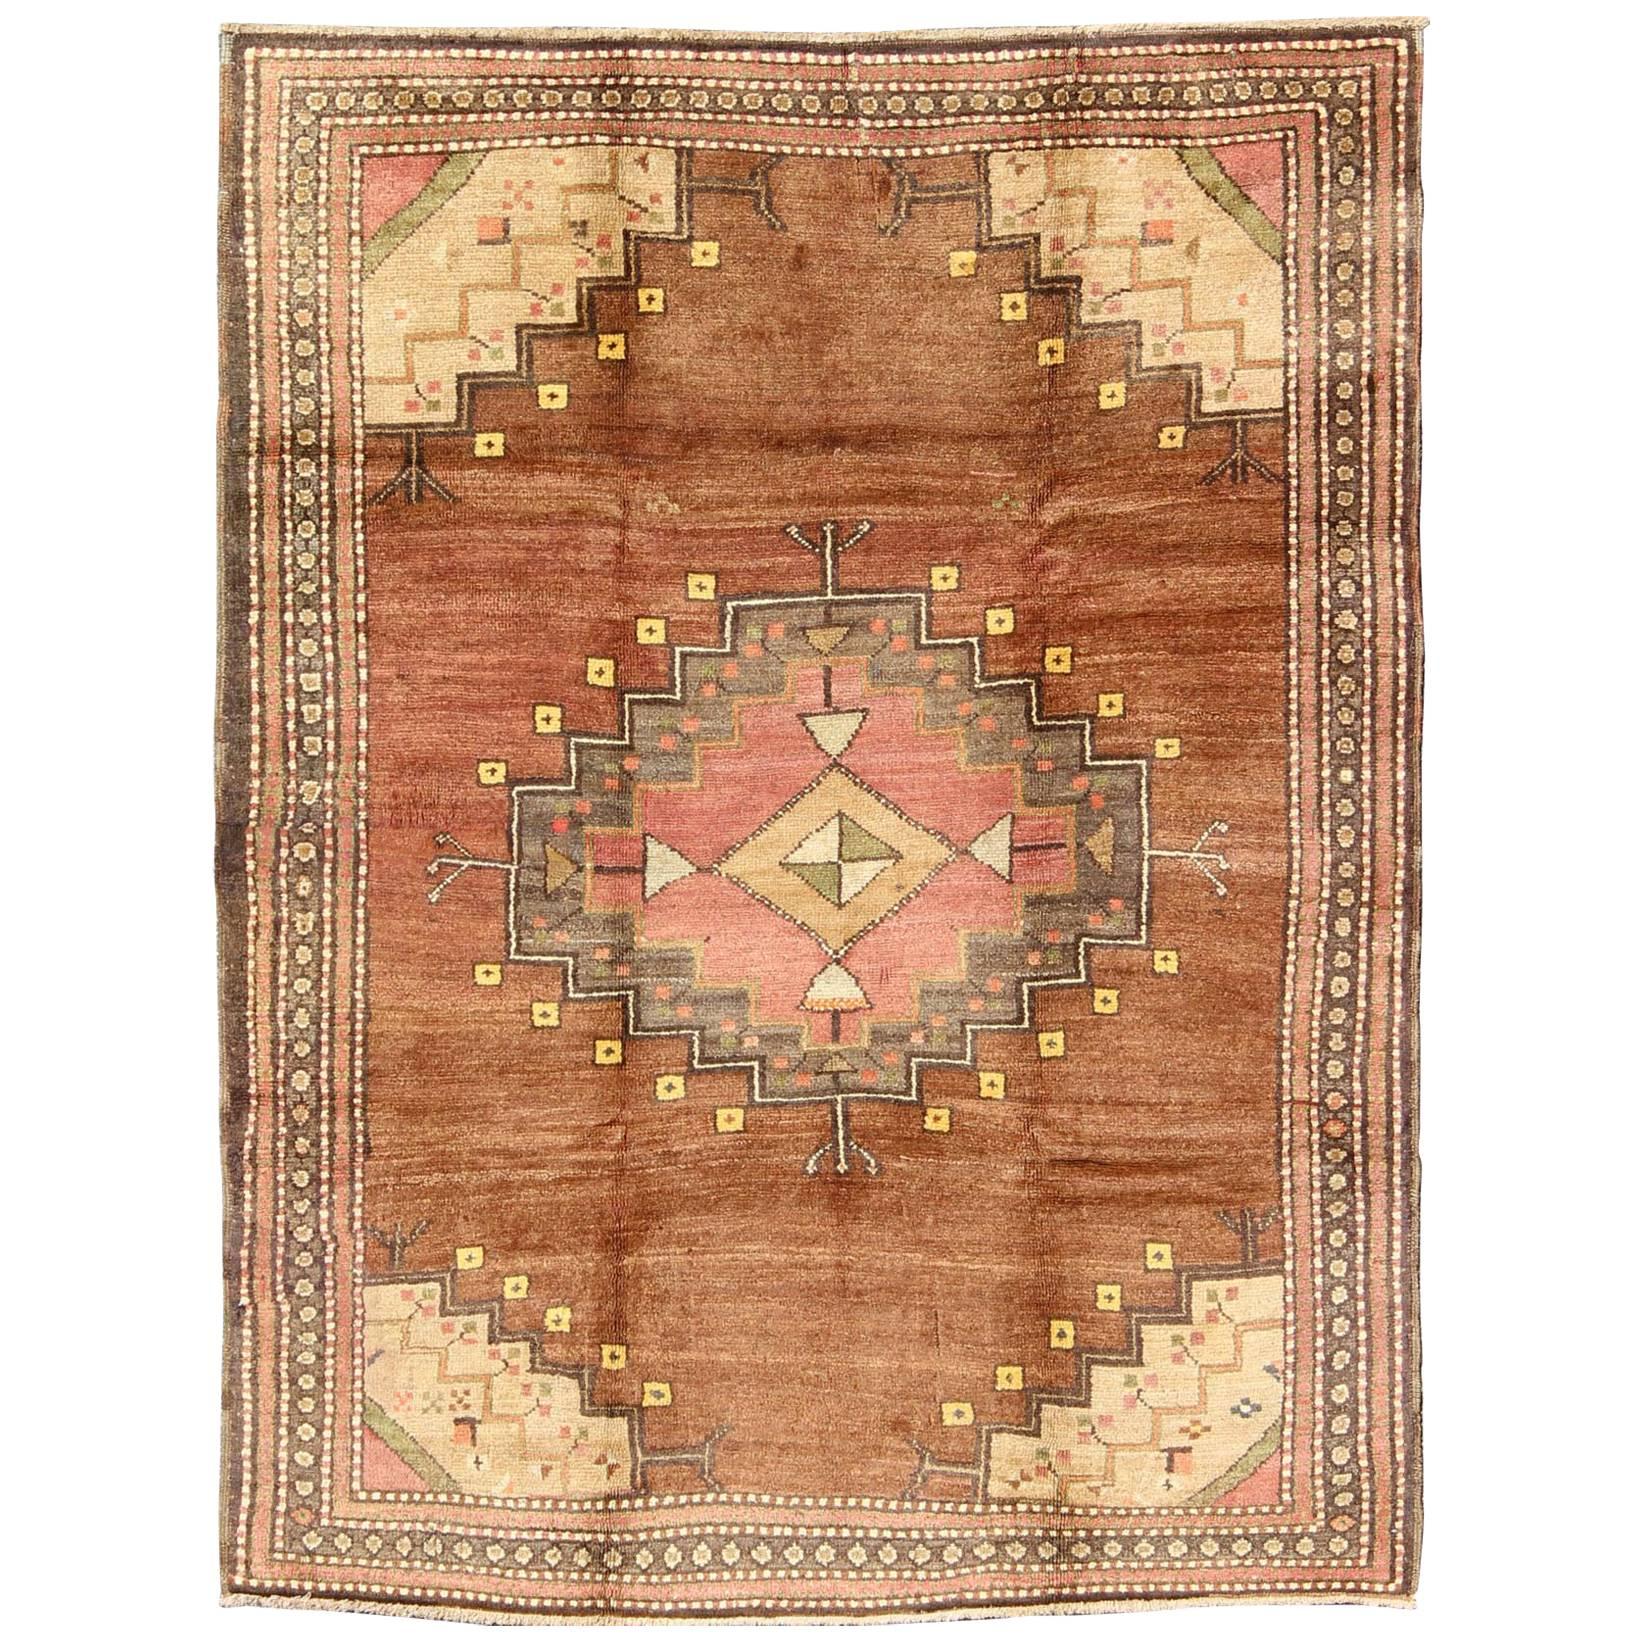 Tribal Medallion Vintage Turkish Oushak Rug in Shades of Brown and Red